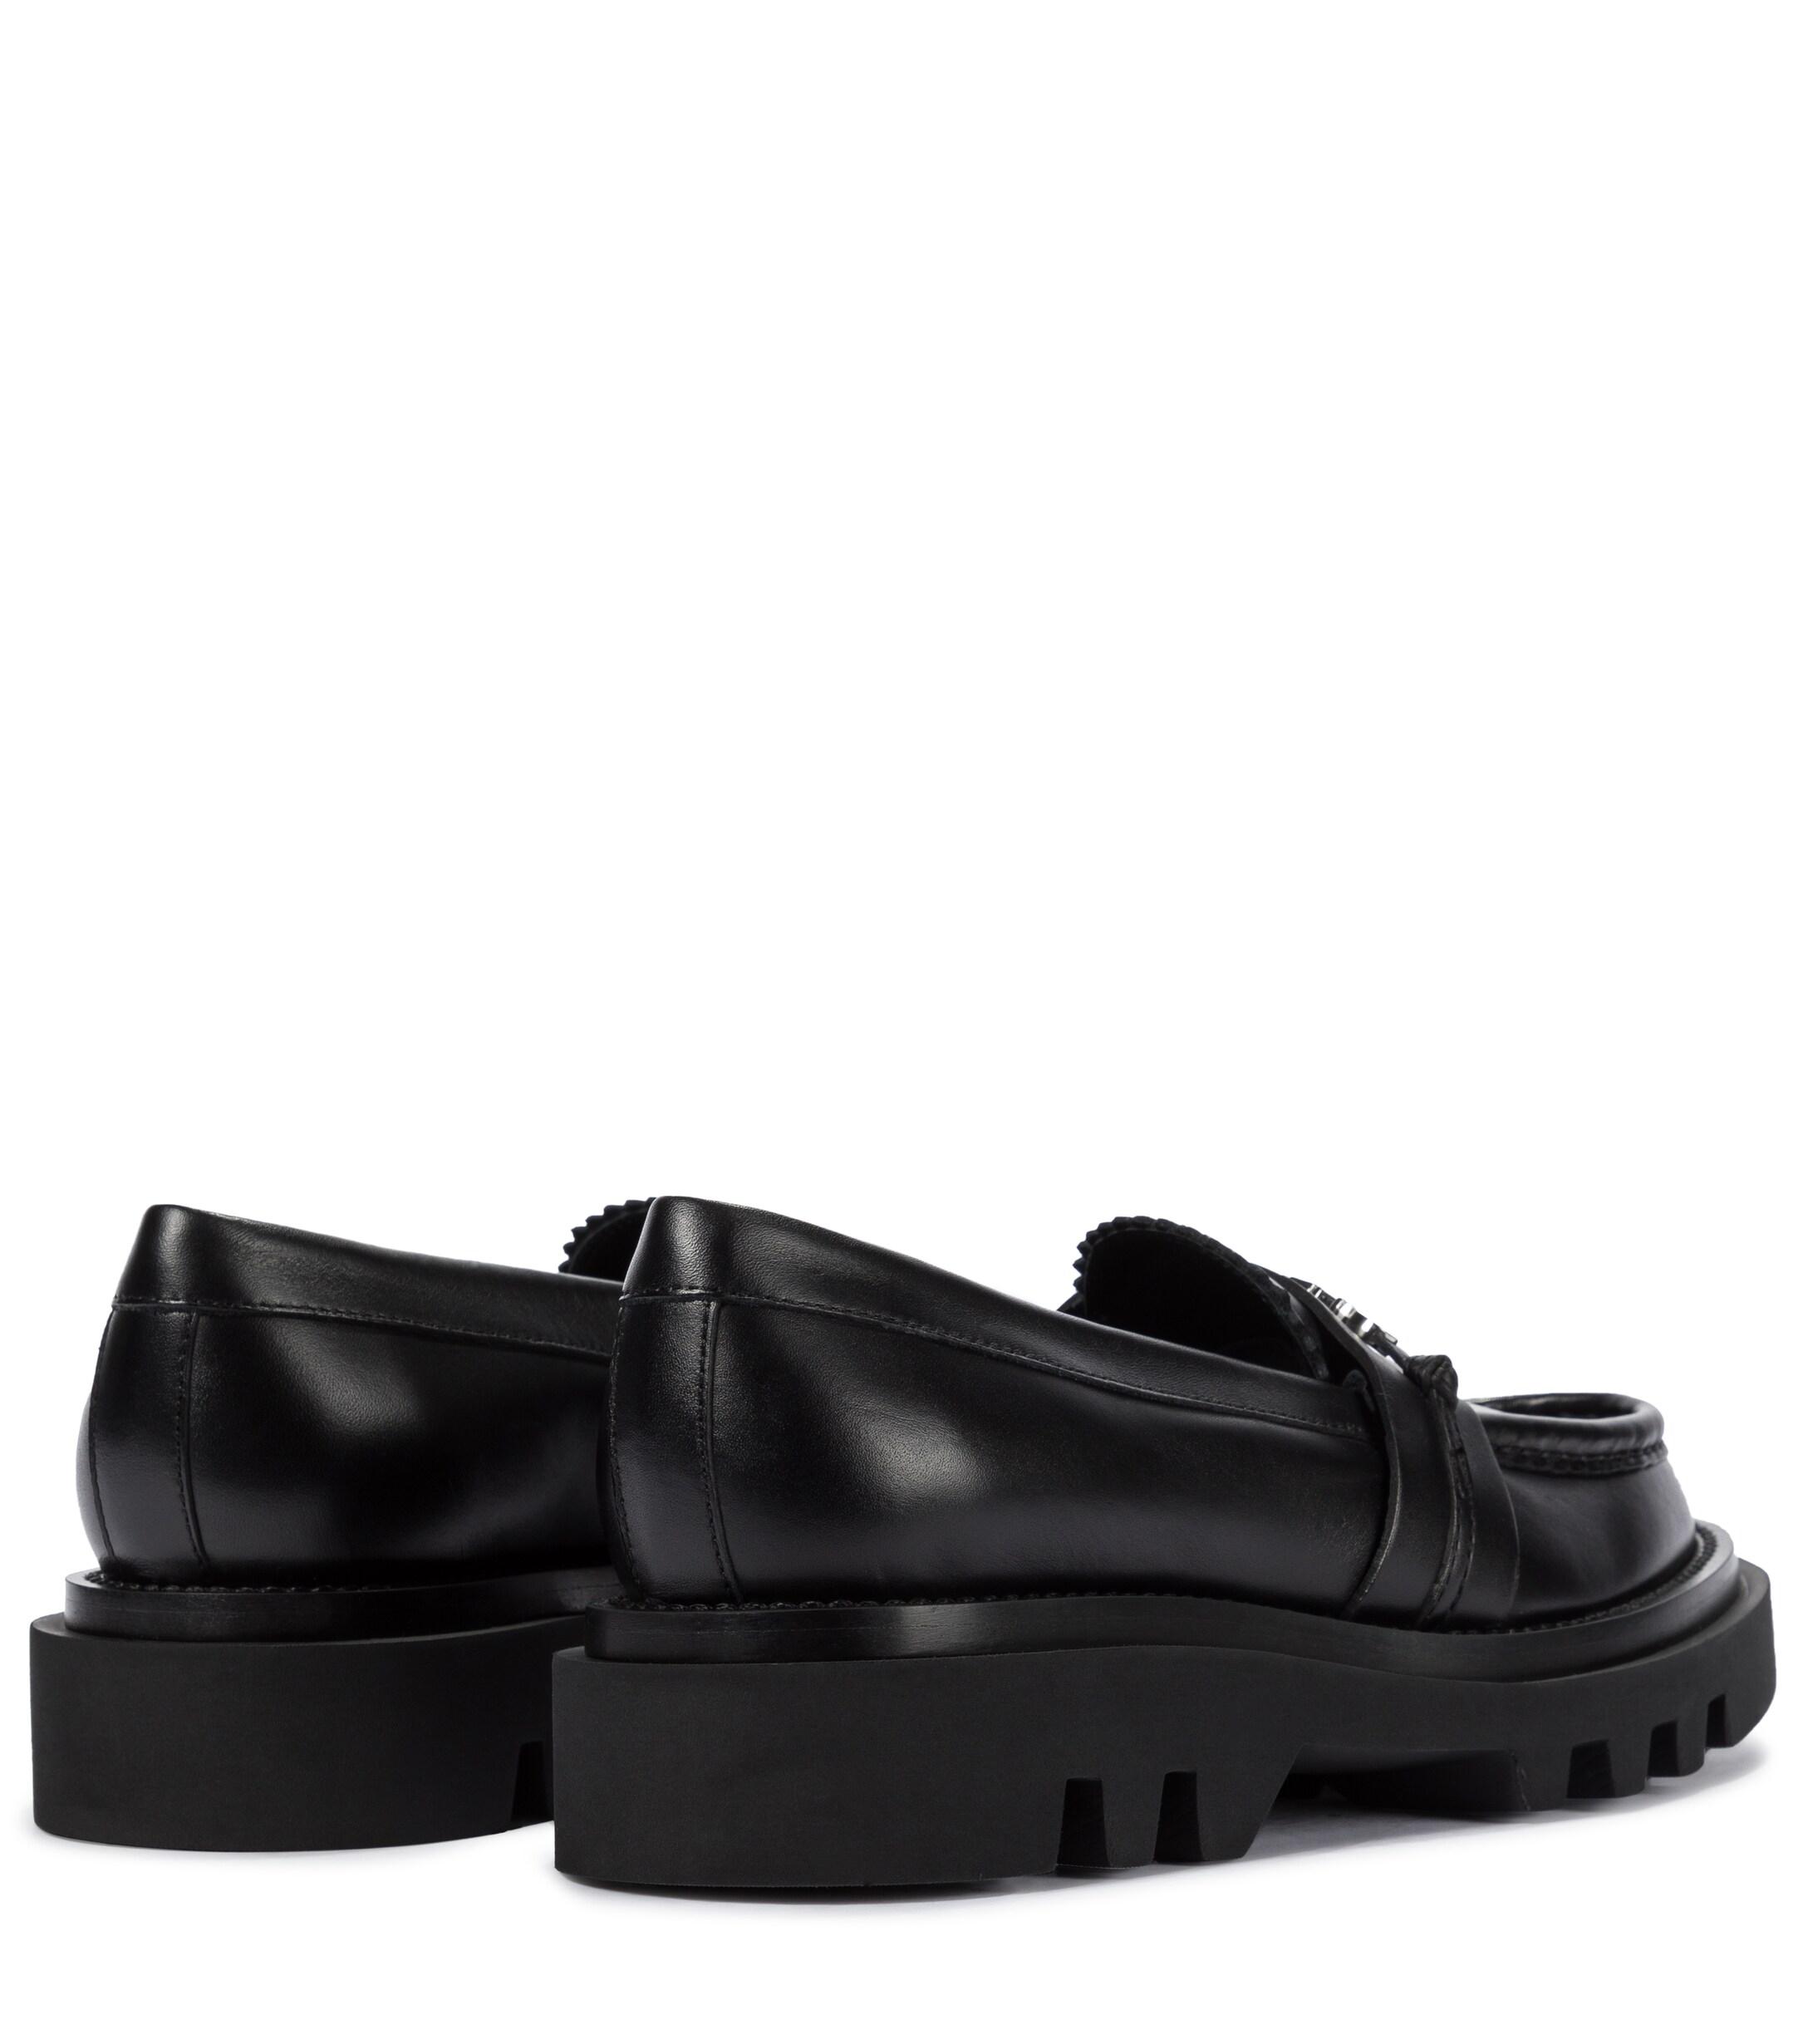 Givenchy Elba Leather Loafers in Black - Lyst